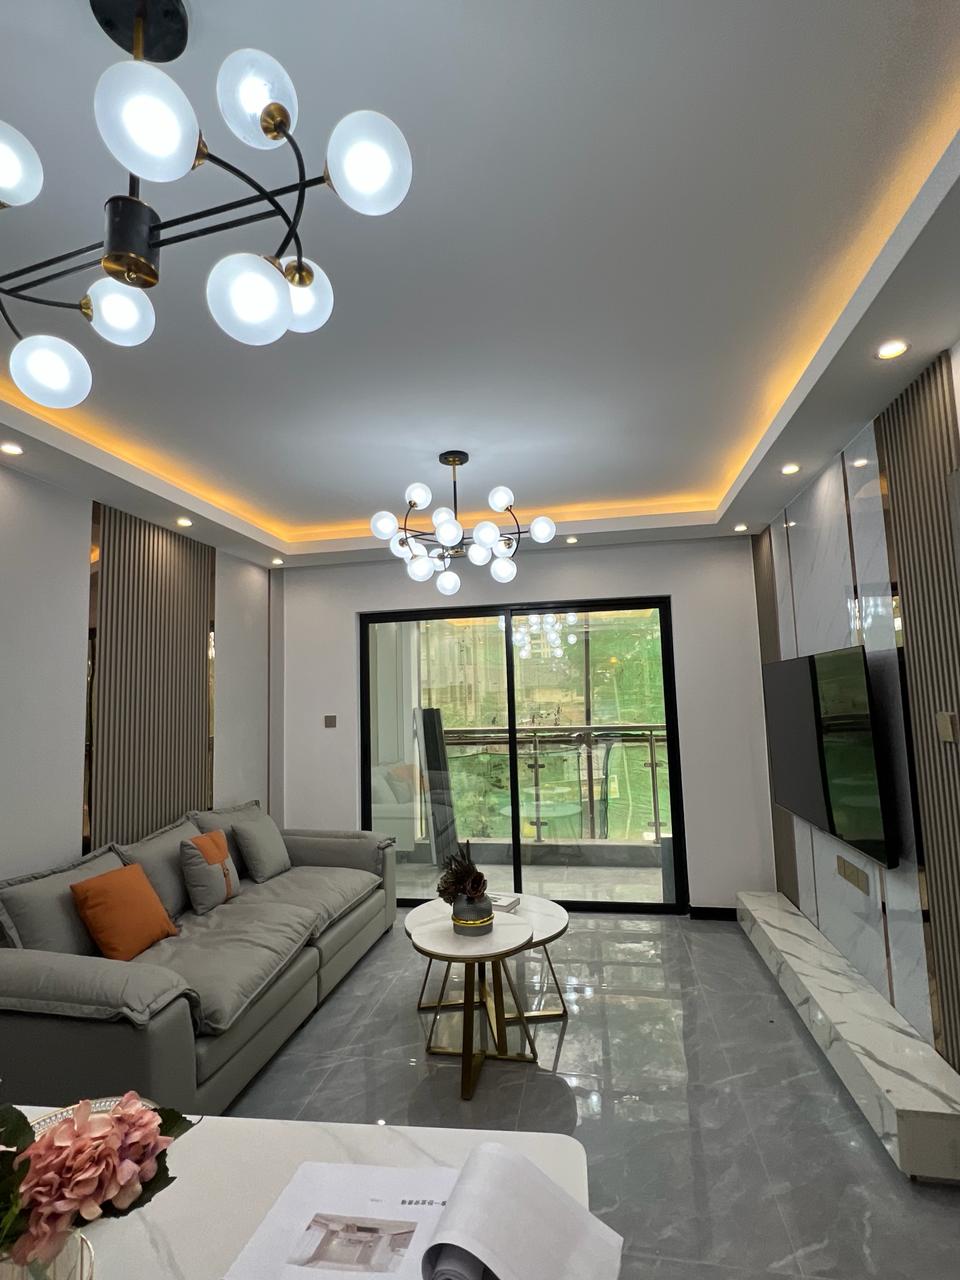 Modern 1 Bedroom Apartment For Sale in Kileleshwa. With Fully equipped gym, rooftop clubhouse, and swimming pool. Asking Price. 8.2 M. Musilli Homes.